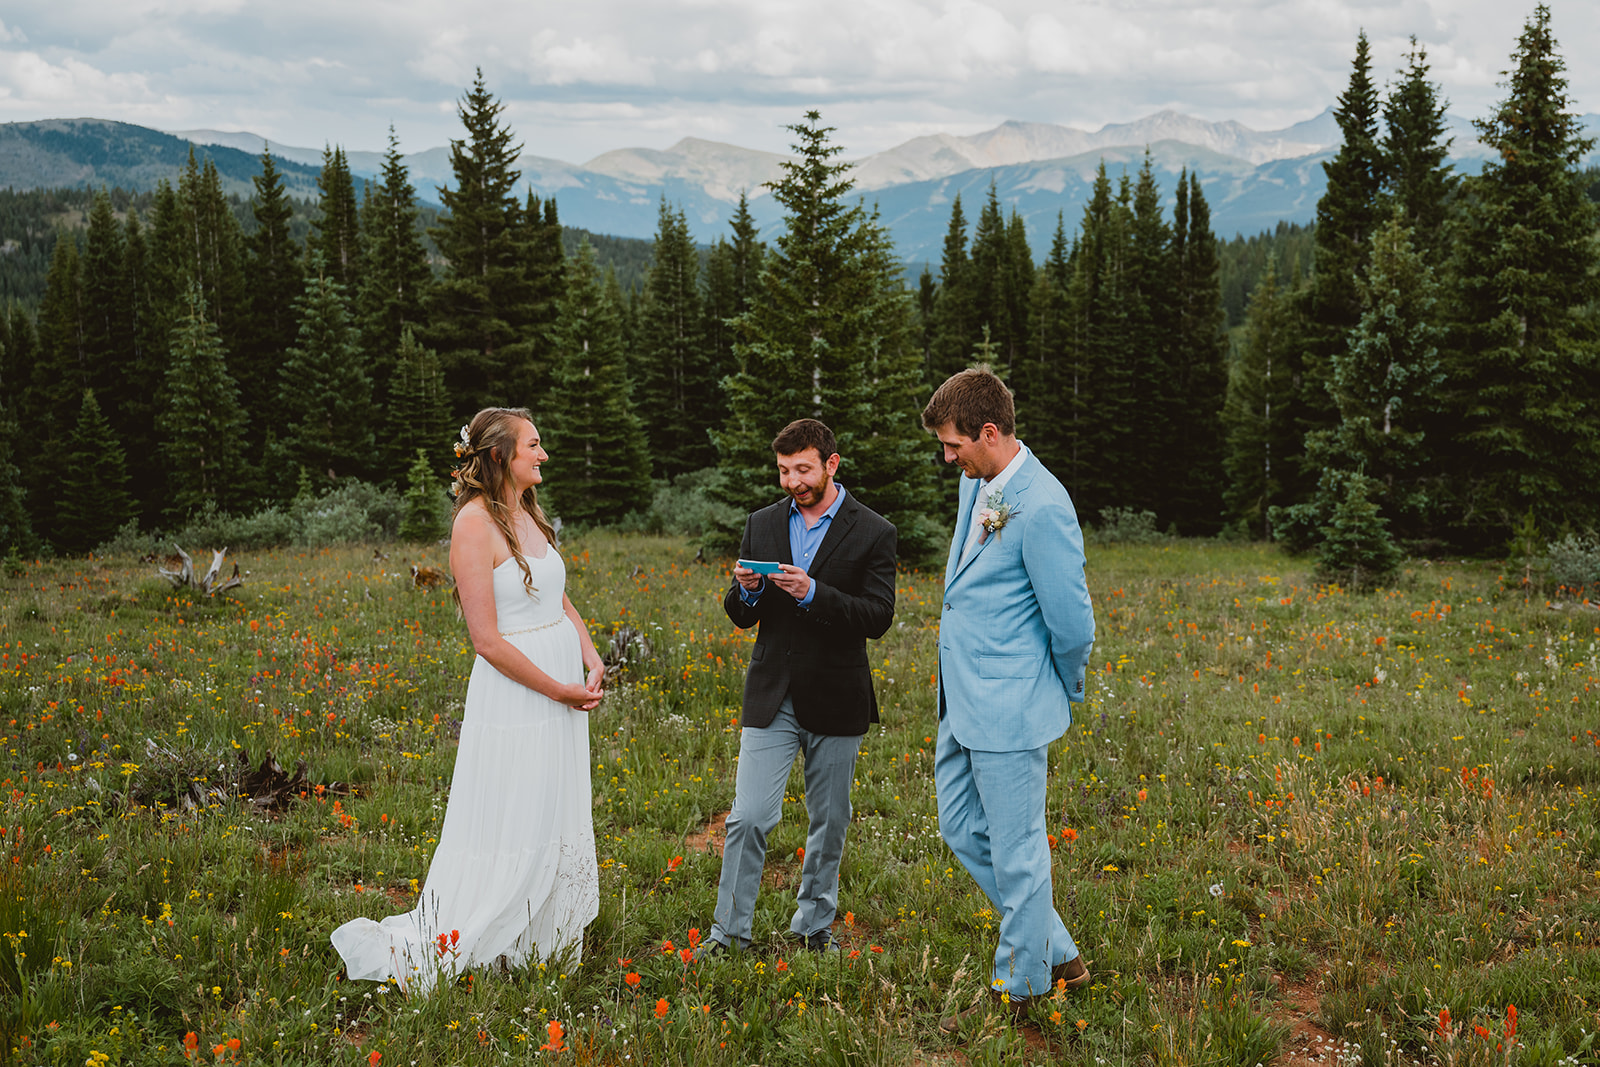 Shrine Pass Huts Summer Wedding, Frisco, CO. Ceremony in the wildflowers 